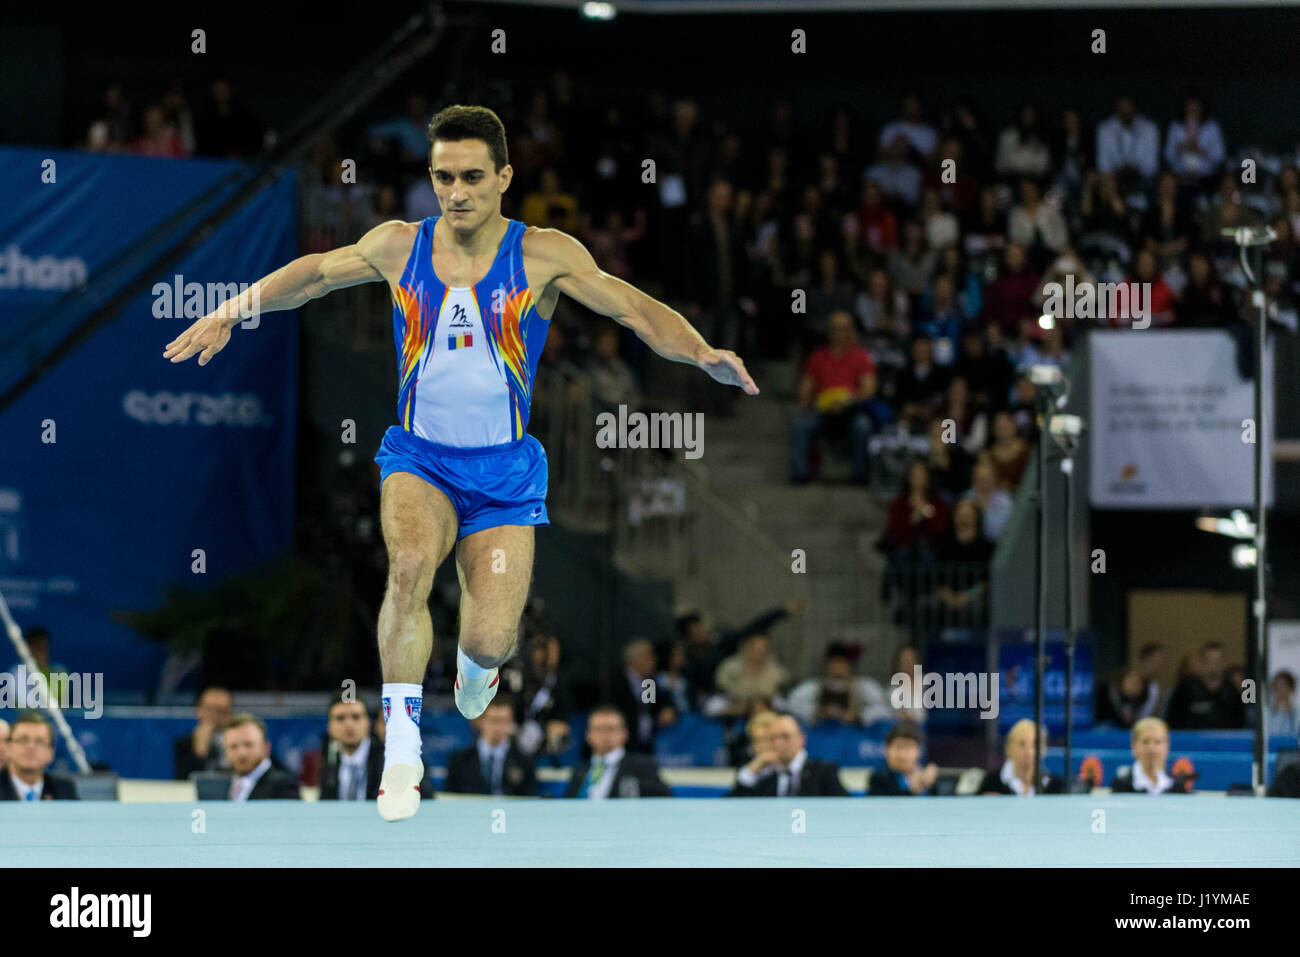 Marian Dragulescu (ROU) performs on the floor during the Men's Apparatus Finals at the European Men's and Women's Artistic Gymnastics Championships in Cluj Napoca, Romania. 22.04.2017 Photo: Catalin Soare/dpa Stock Photo